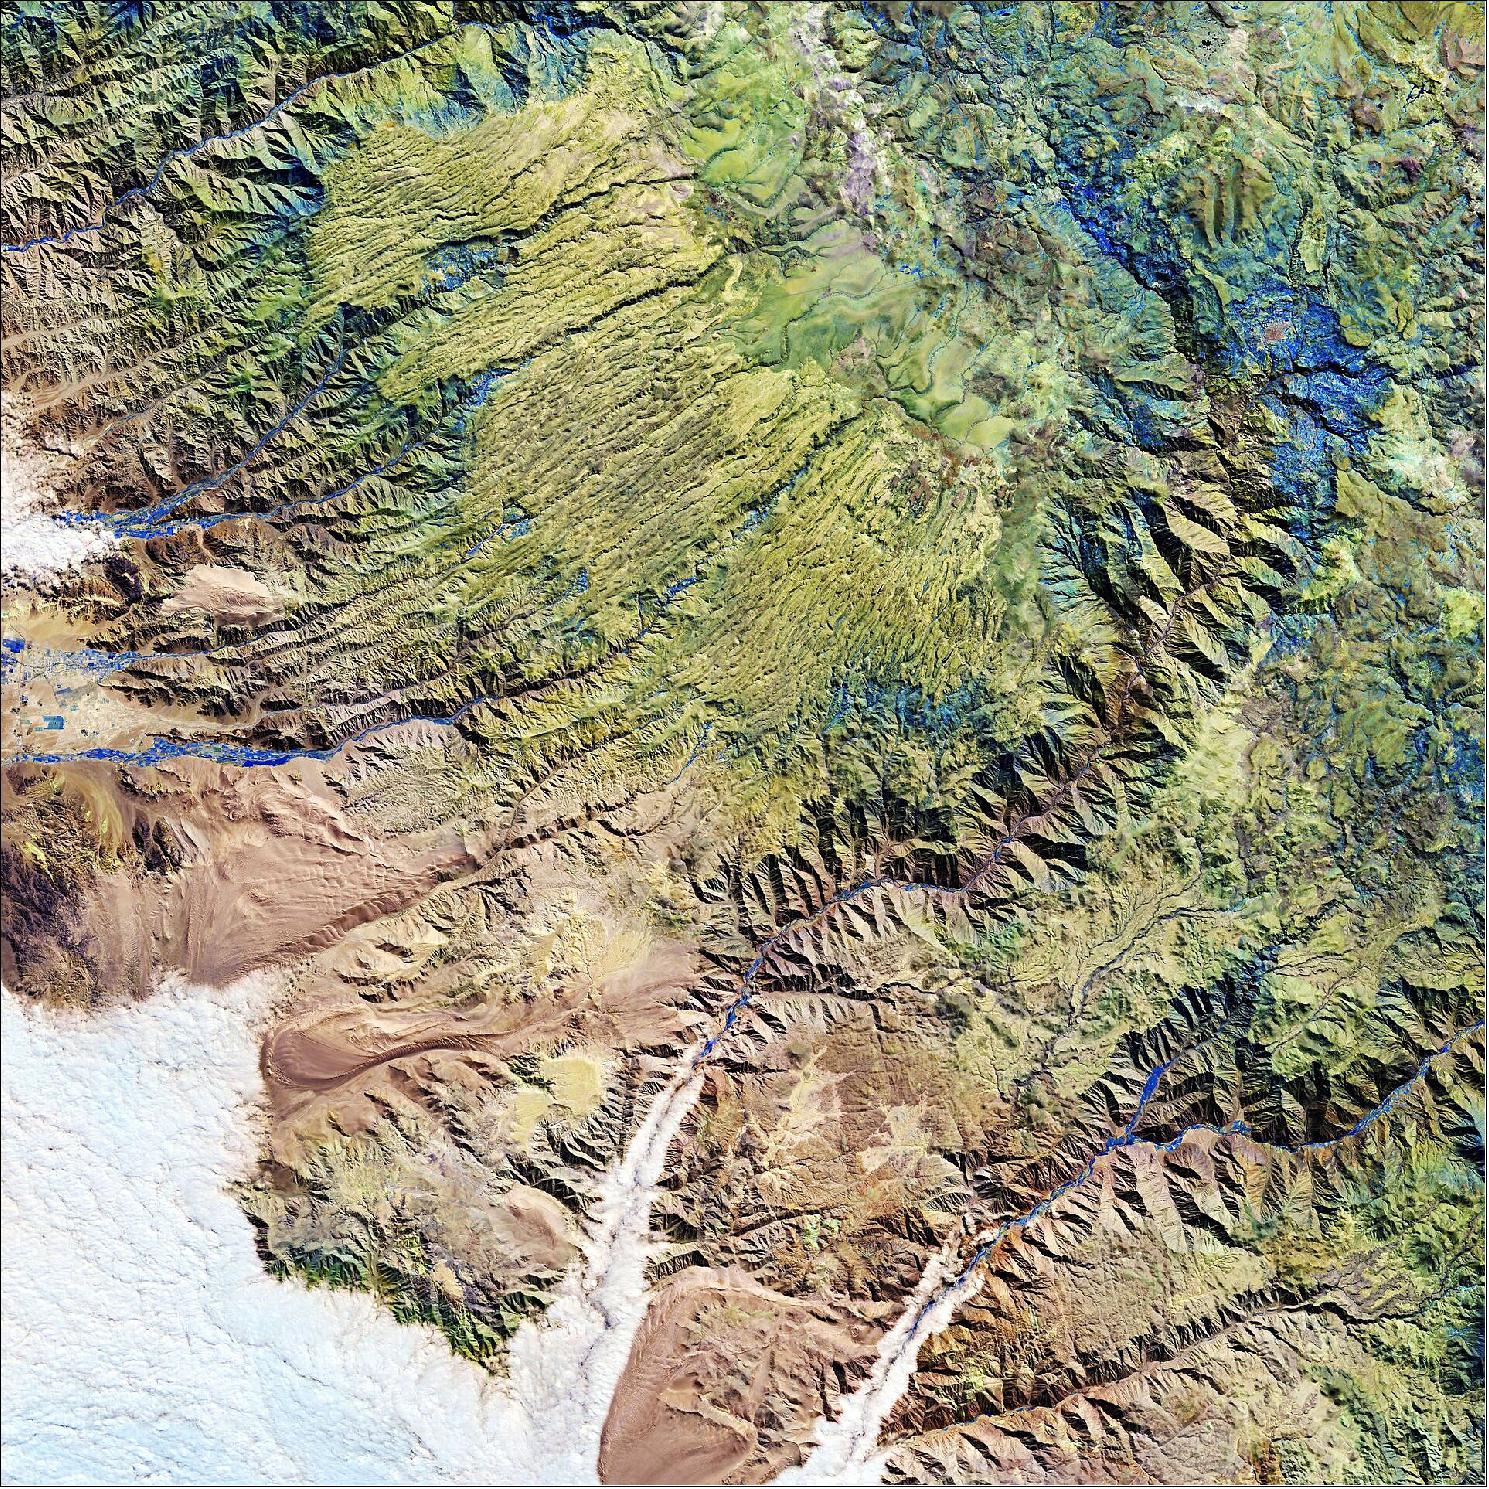 Figure 29: In this image of Sentinel-2, captured on 16 June 2020, parts of the Ica, Ayacucho and Arequipa Regions in Peru are featured. Streams of water flowing from the high altitudes, and through the valleys, provide water for irrigation to the nearby agricultural fields. Some of these agricultural plots can be seen in bright blue in the image. This image is also featured on the Earth from Space video program (image credit: ESA, the image contains modified Copernicus Sentinel data (2020), processed by ESA, CC BY-SA 3.0 IGO)